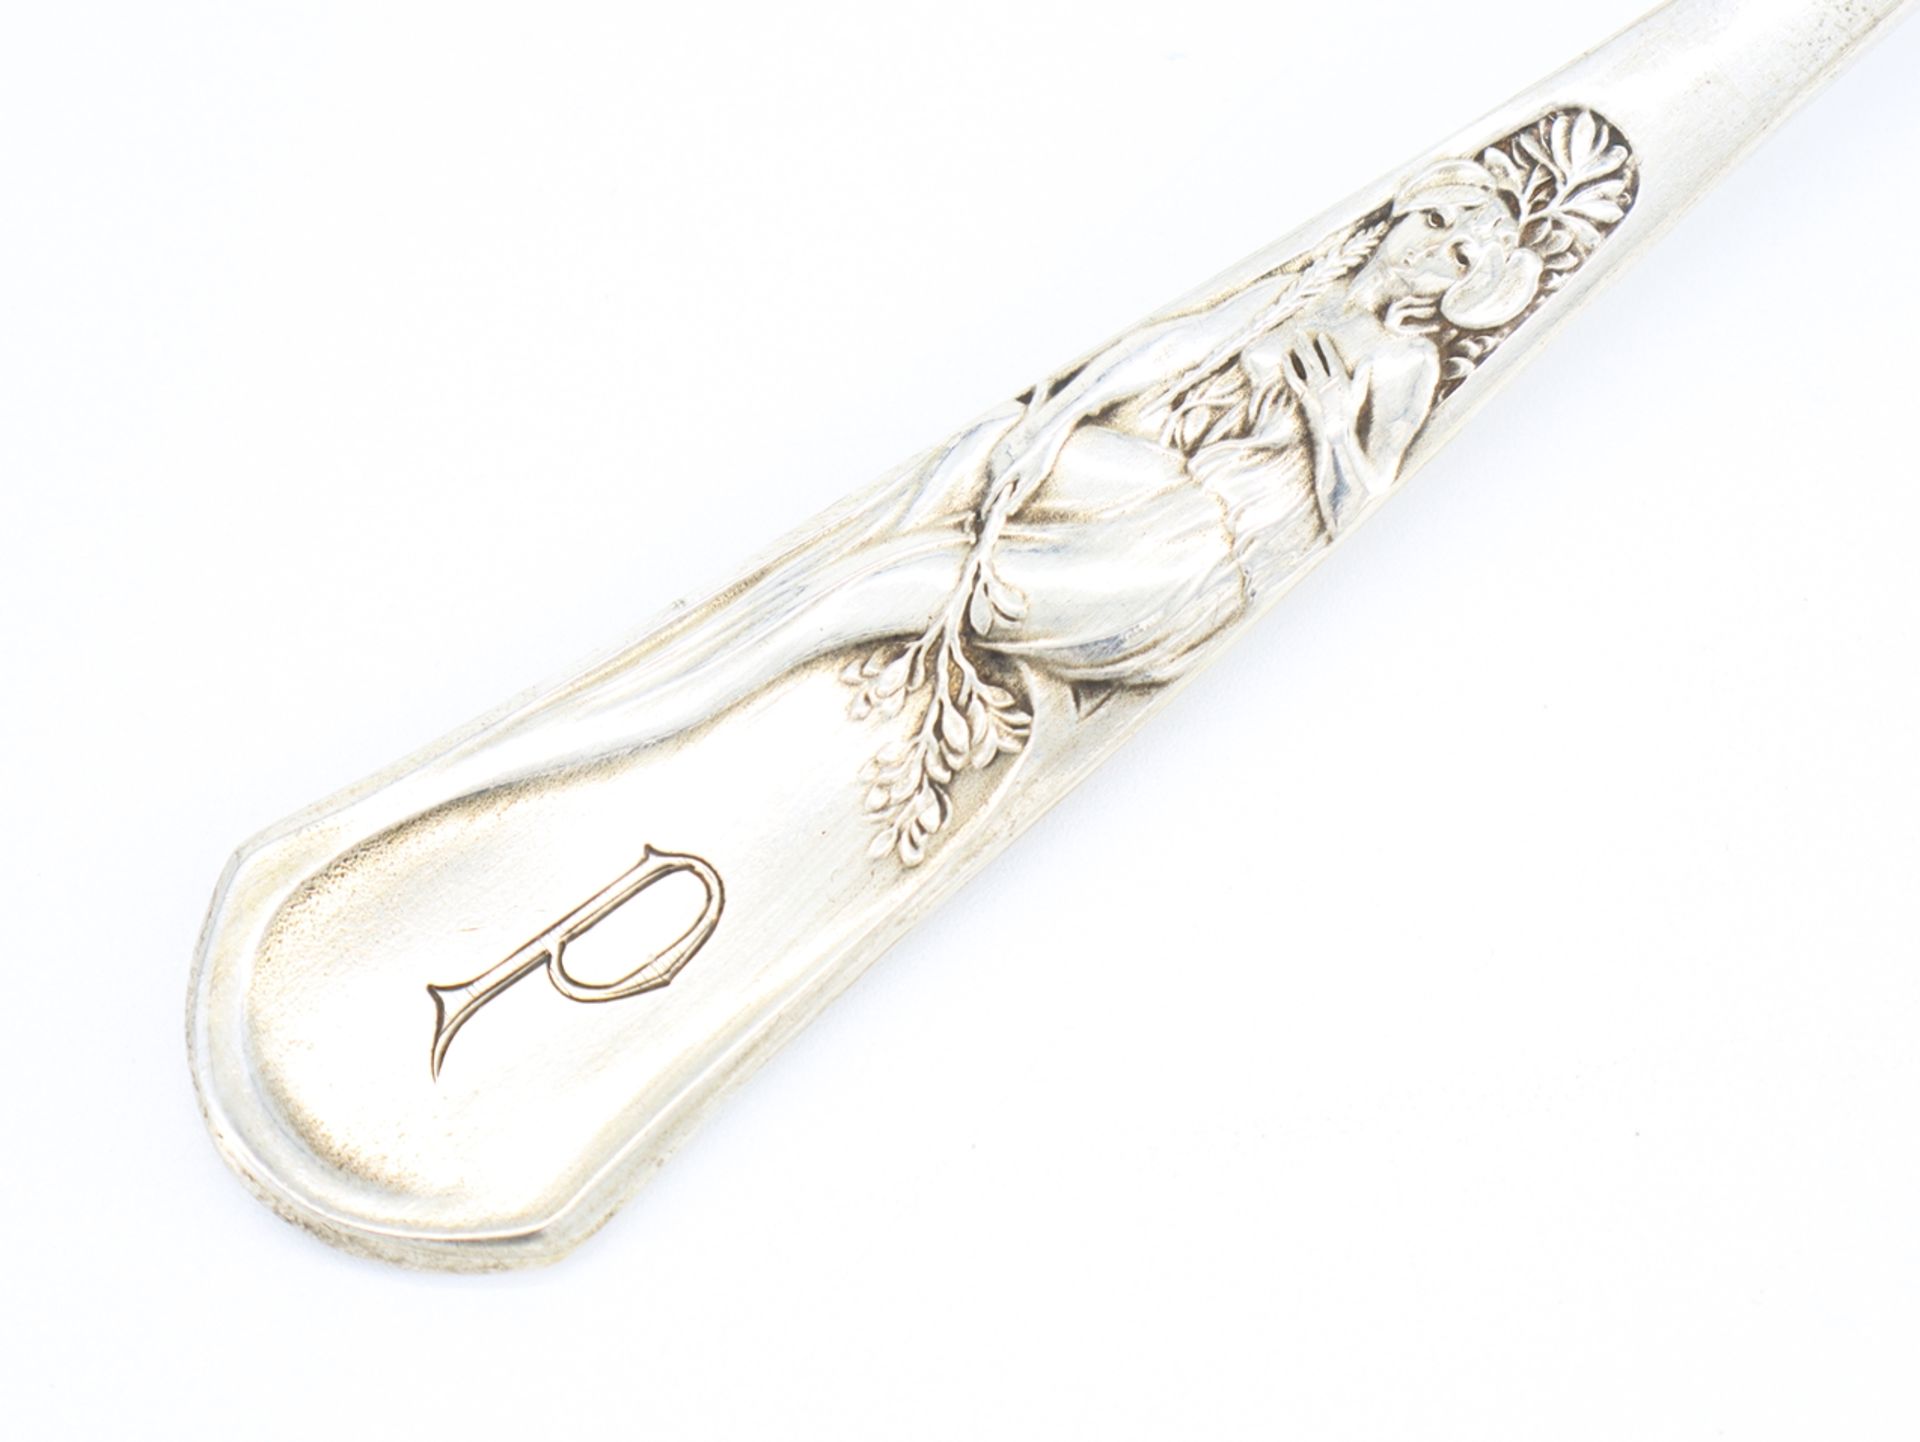 2 pieces of cutlery in finest art nouveau 800 silver circa 1900. - Image 8 of 8